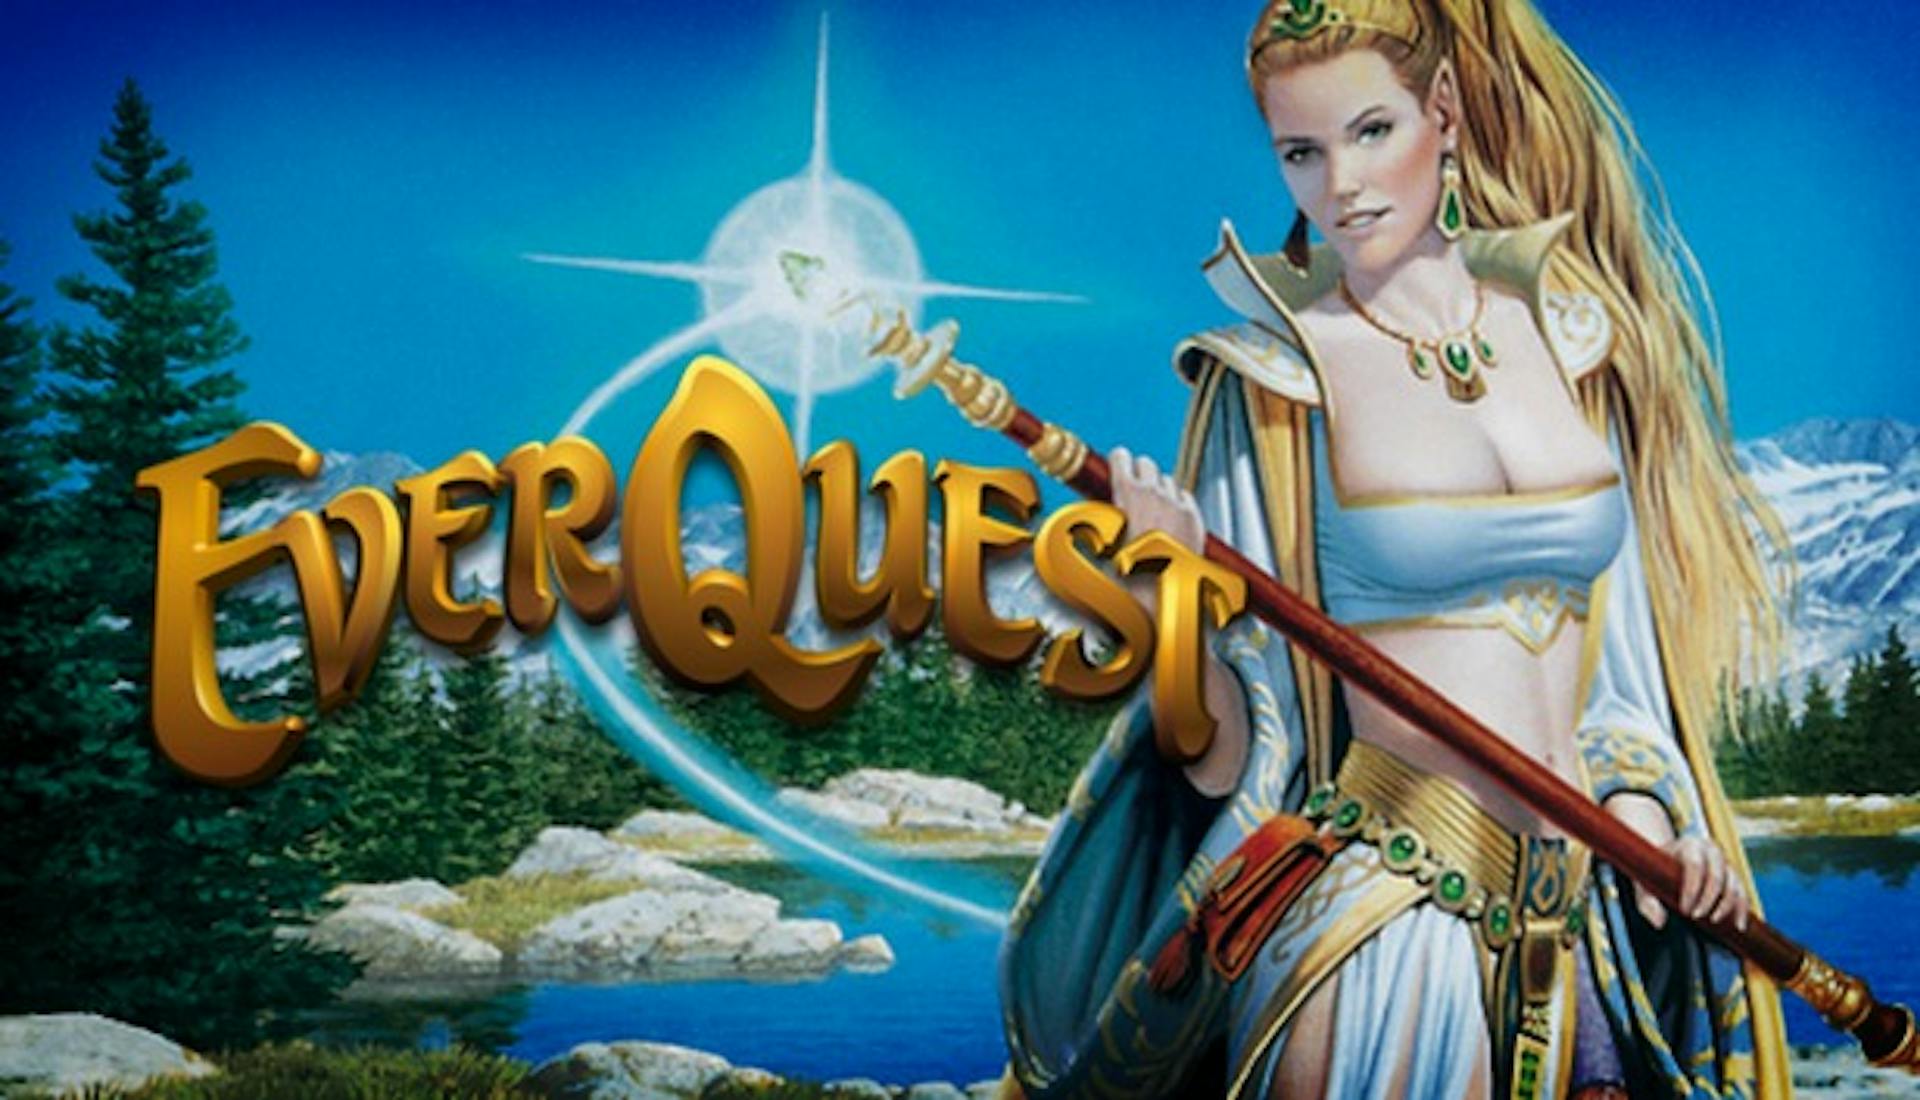 Photo credit: EverQuest on Steam: https://store.steampowered.com/app/205710/EverQuest/